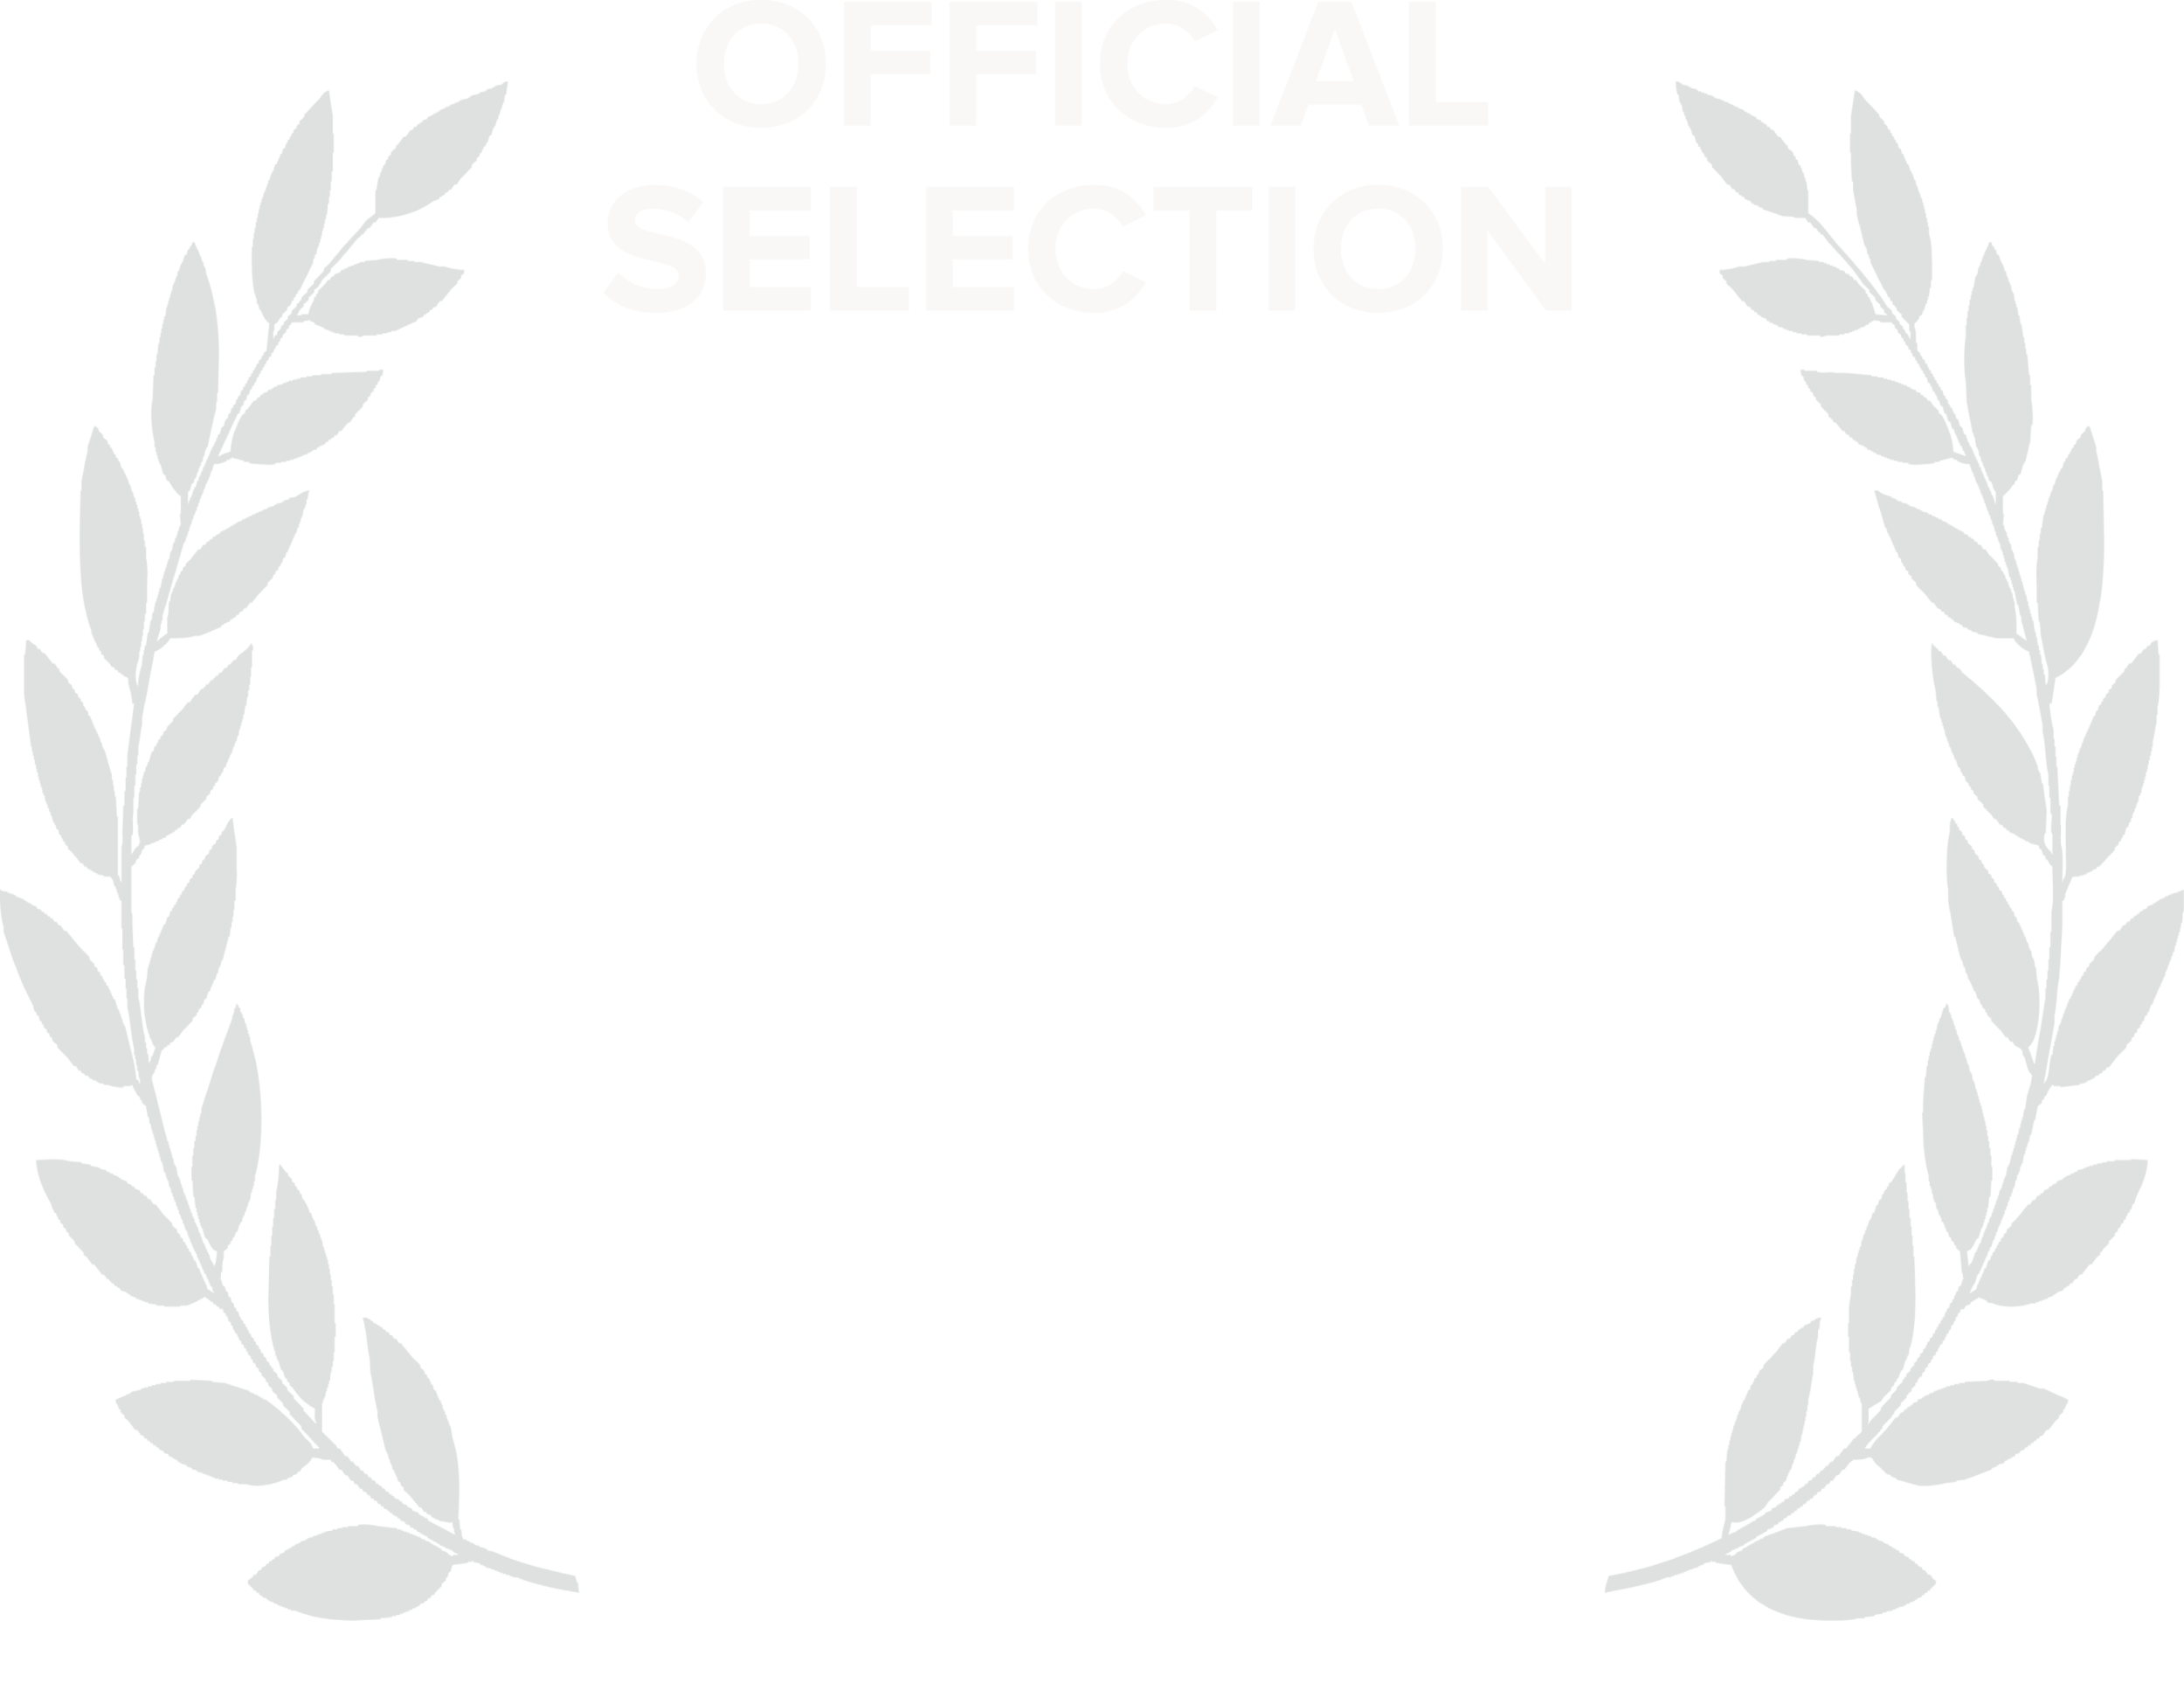 Official selection 2019 2.png